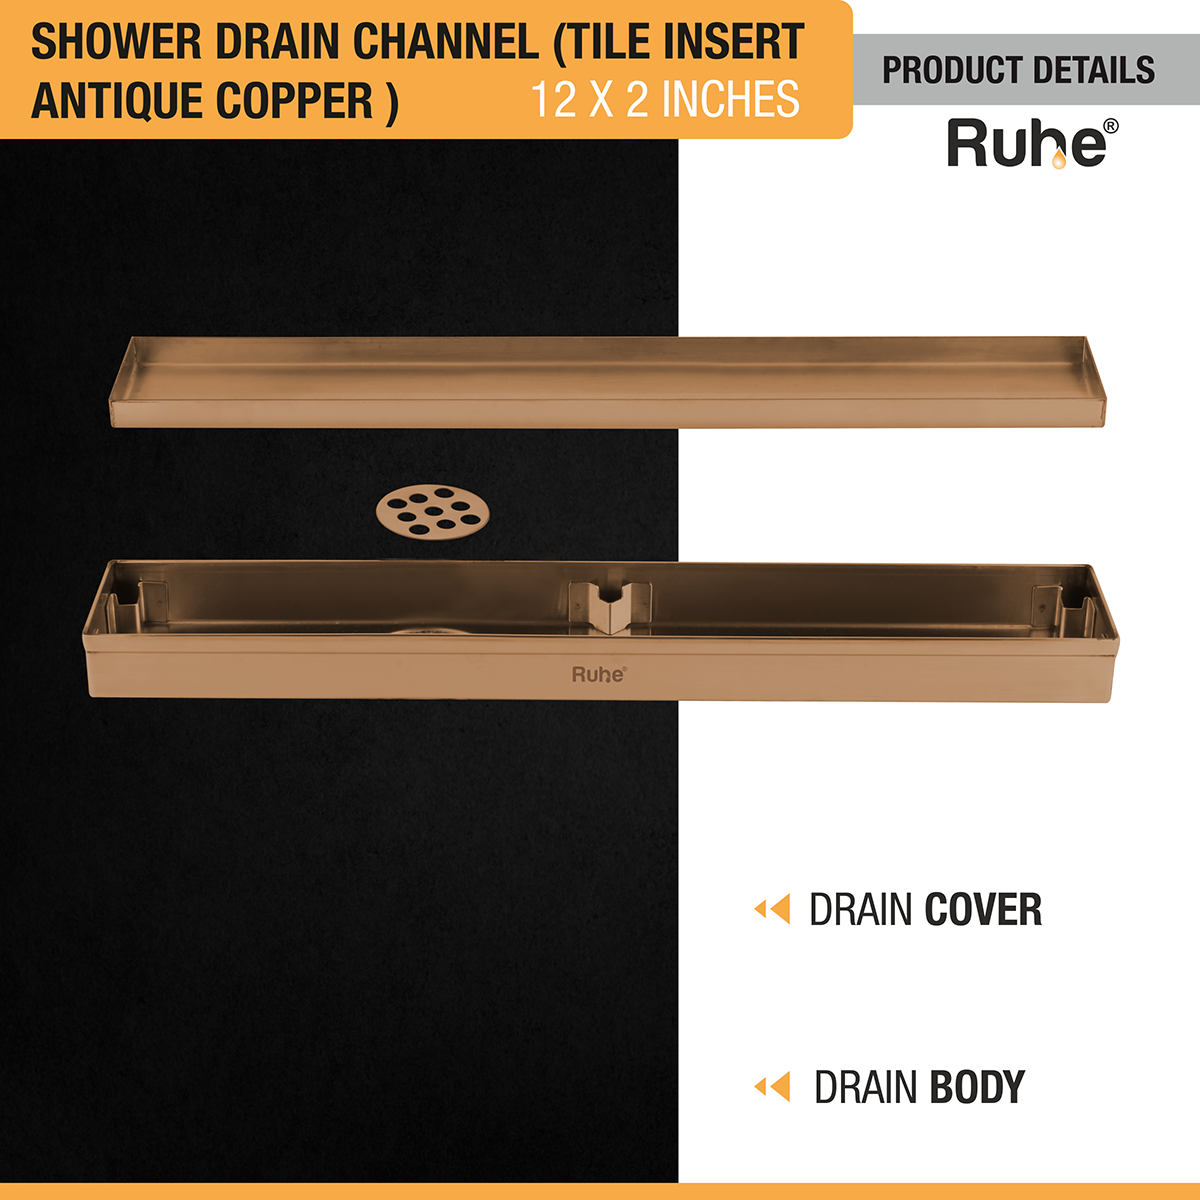 Marble Insert Shower Drain Channel (12 x 2 Inches) ROSE GOLD PVD Coated with drain cover and drain body